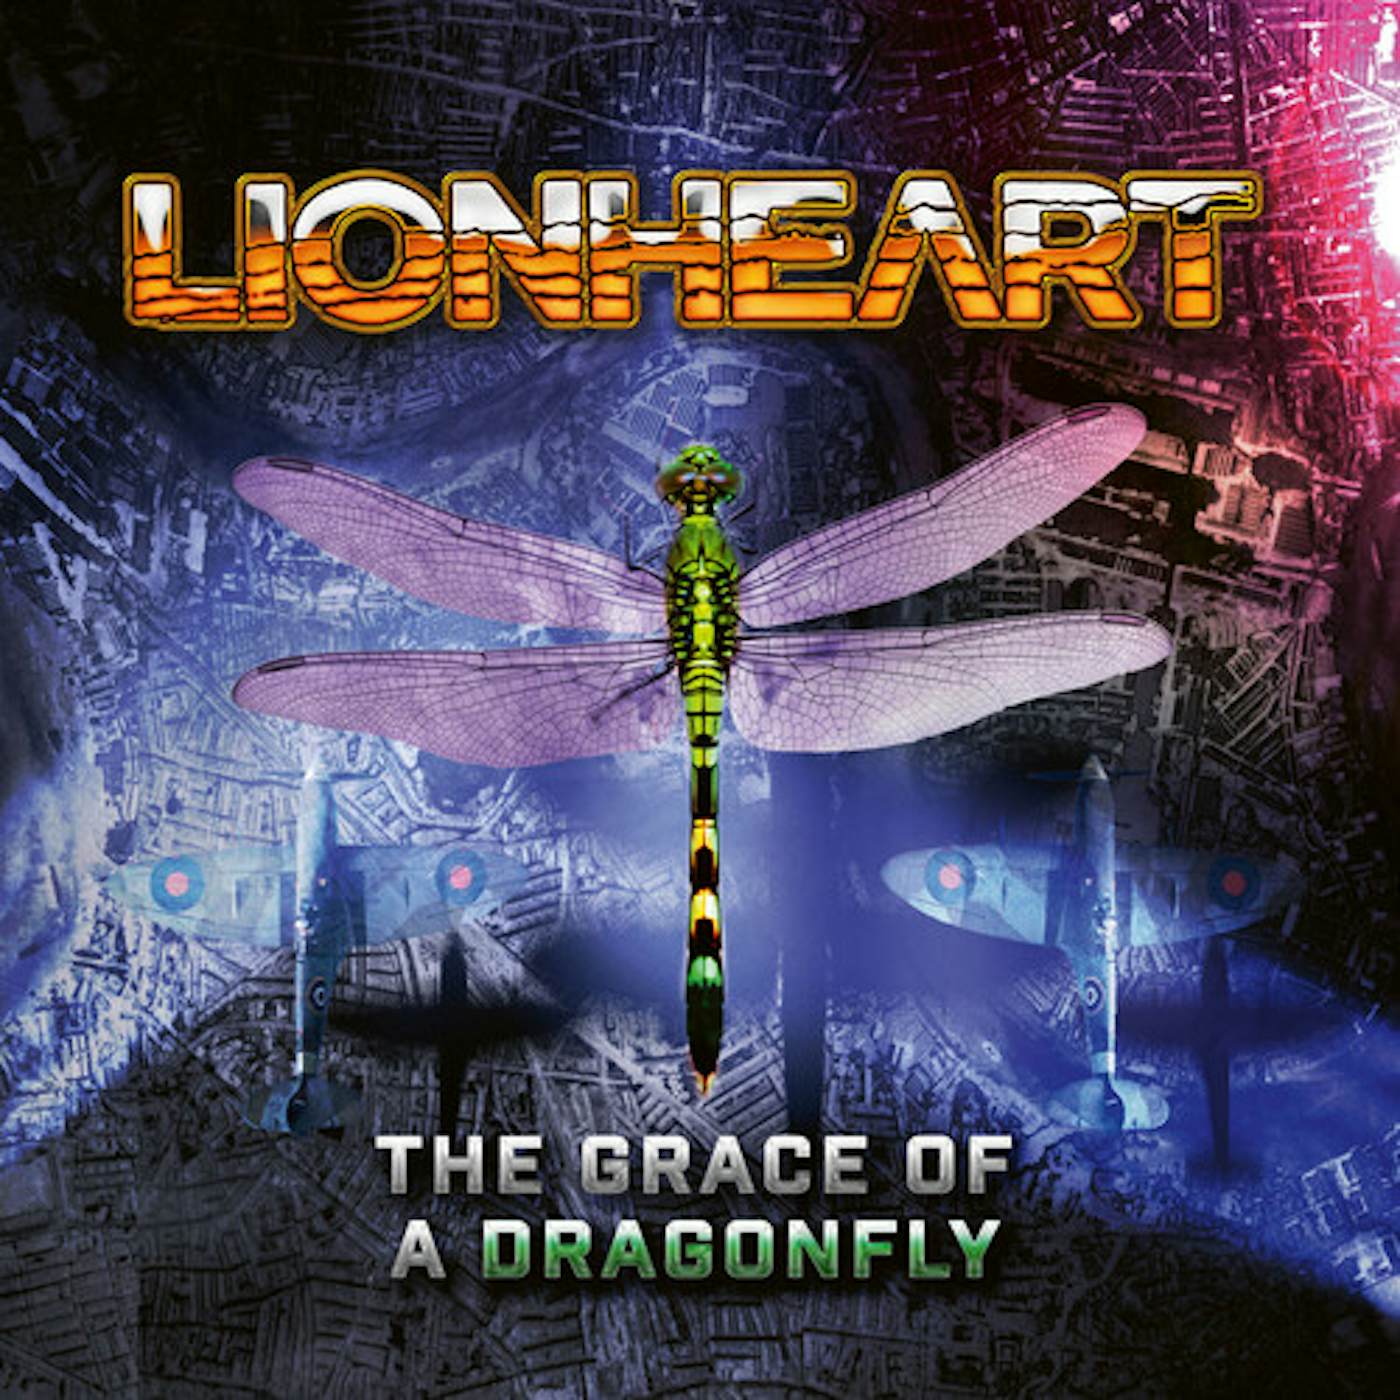 Lionheart GRACE OF A DRAGONFLY CD